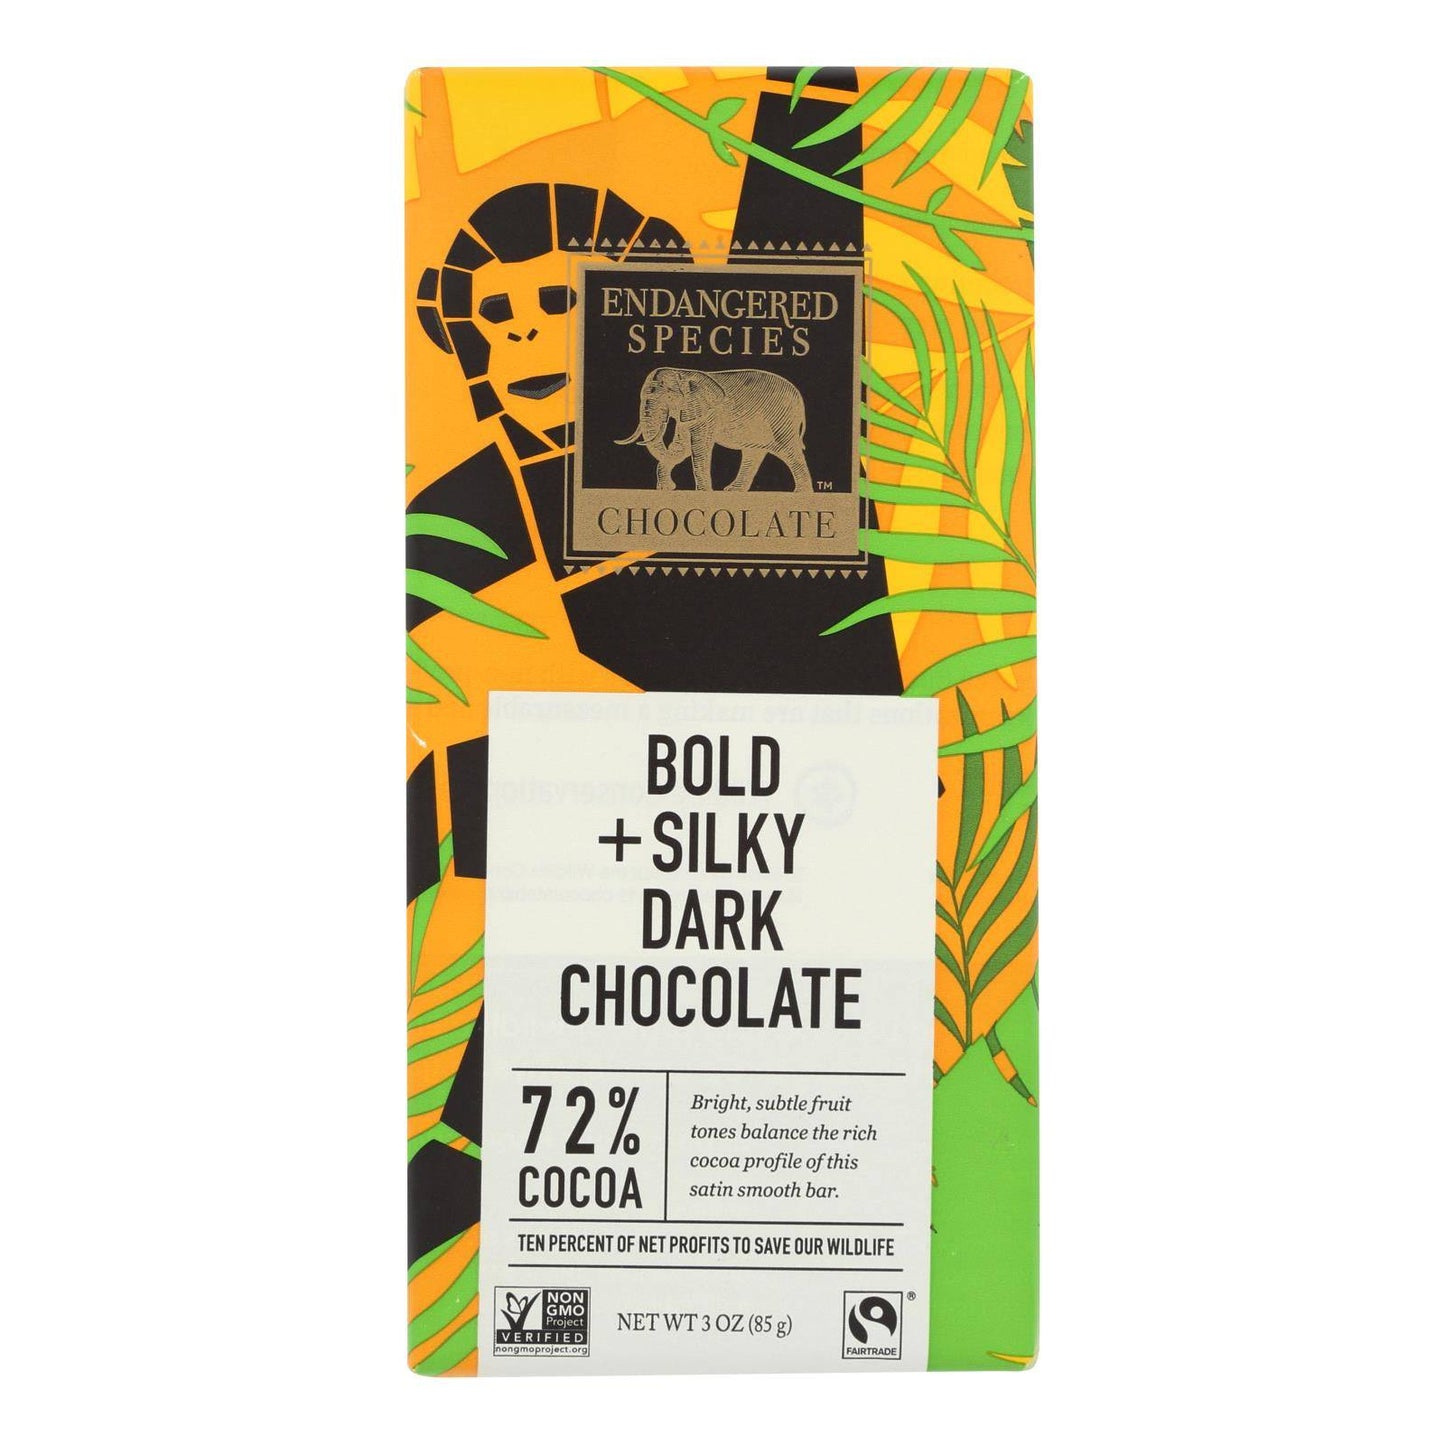 Buy Endangered Species Natural Chocolate Bars - Dark Chocolate - 72 Percent Cocoa - 3 Oz Bars - Case Of 12  at OnlyNaturals.us